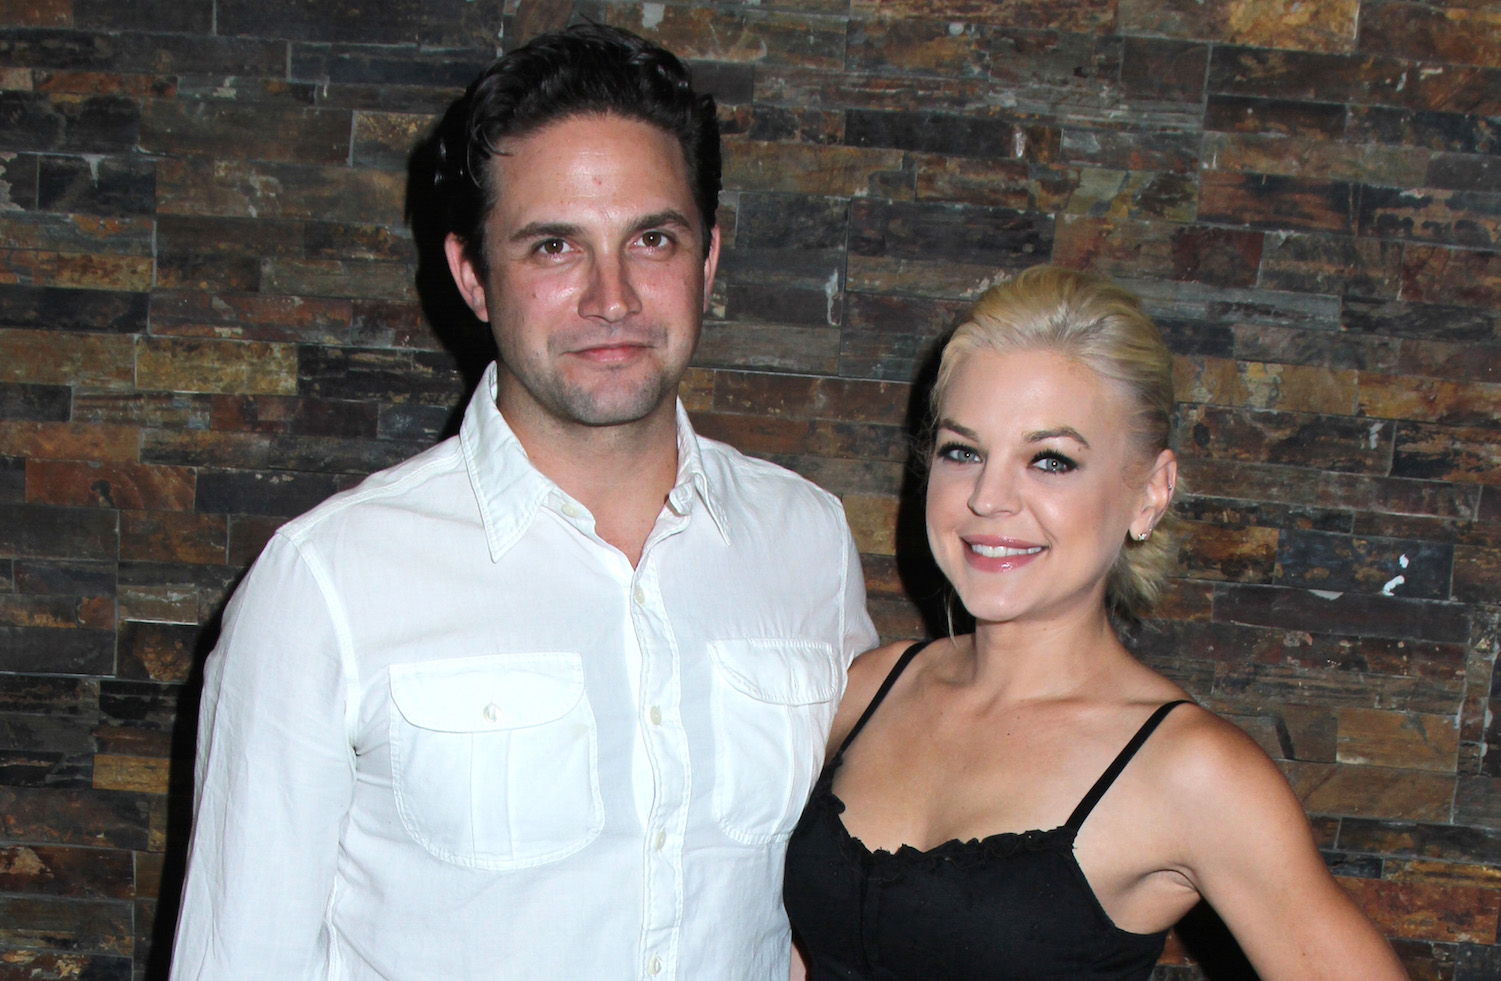 GENERAL HOSPITAL Stars Kirsten Storms and Brandon Barash Open Up About Their Divorce - Soaps In Depth